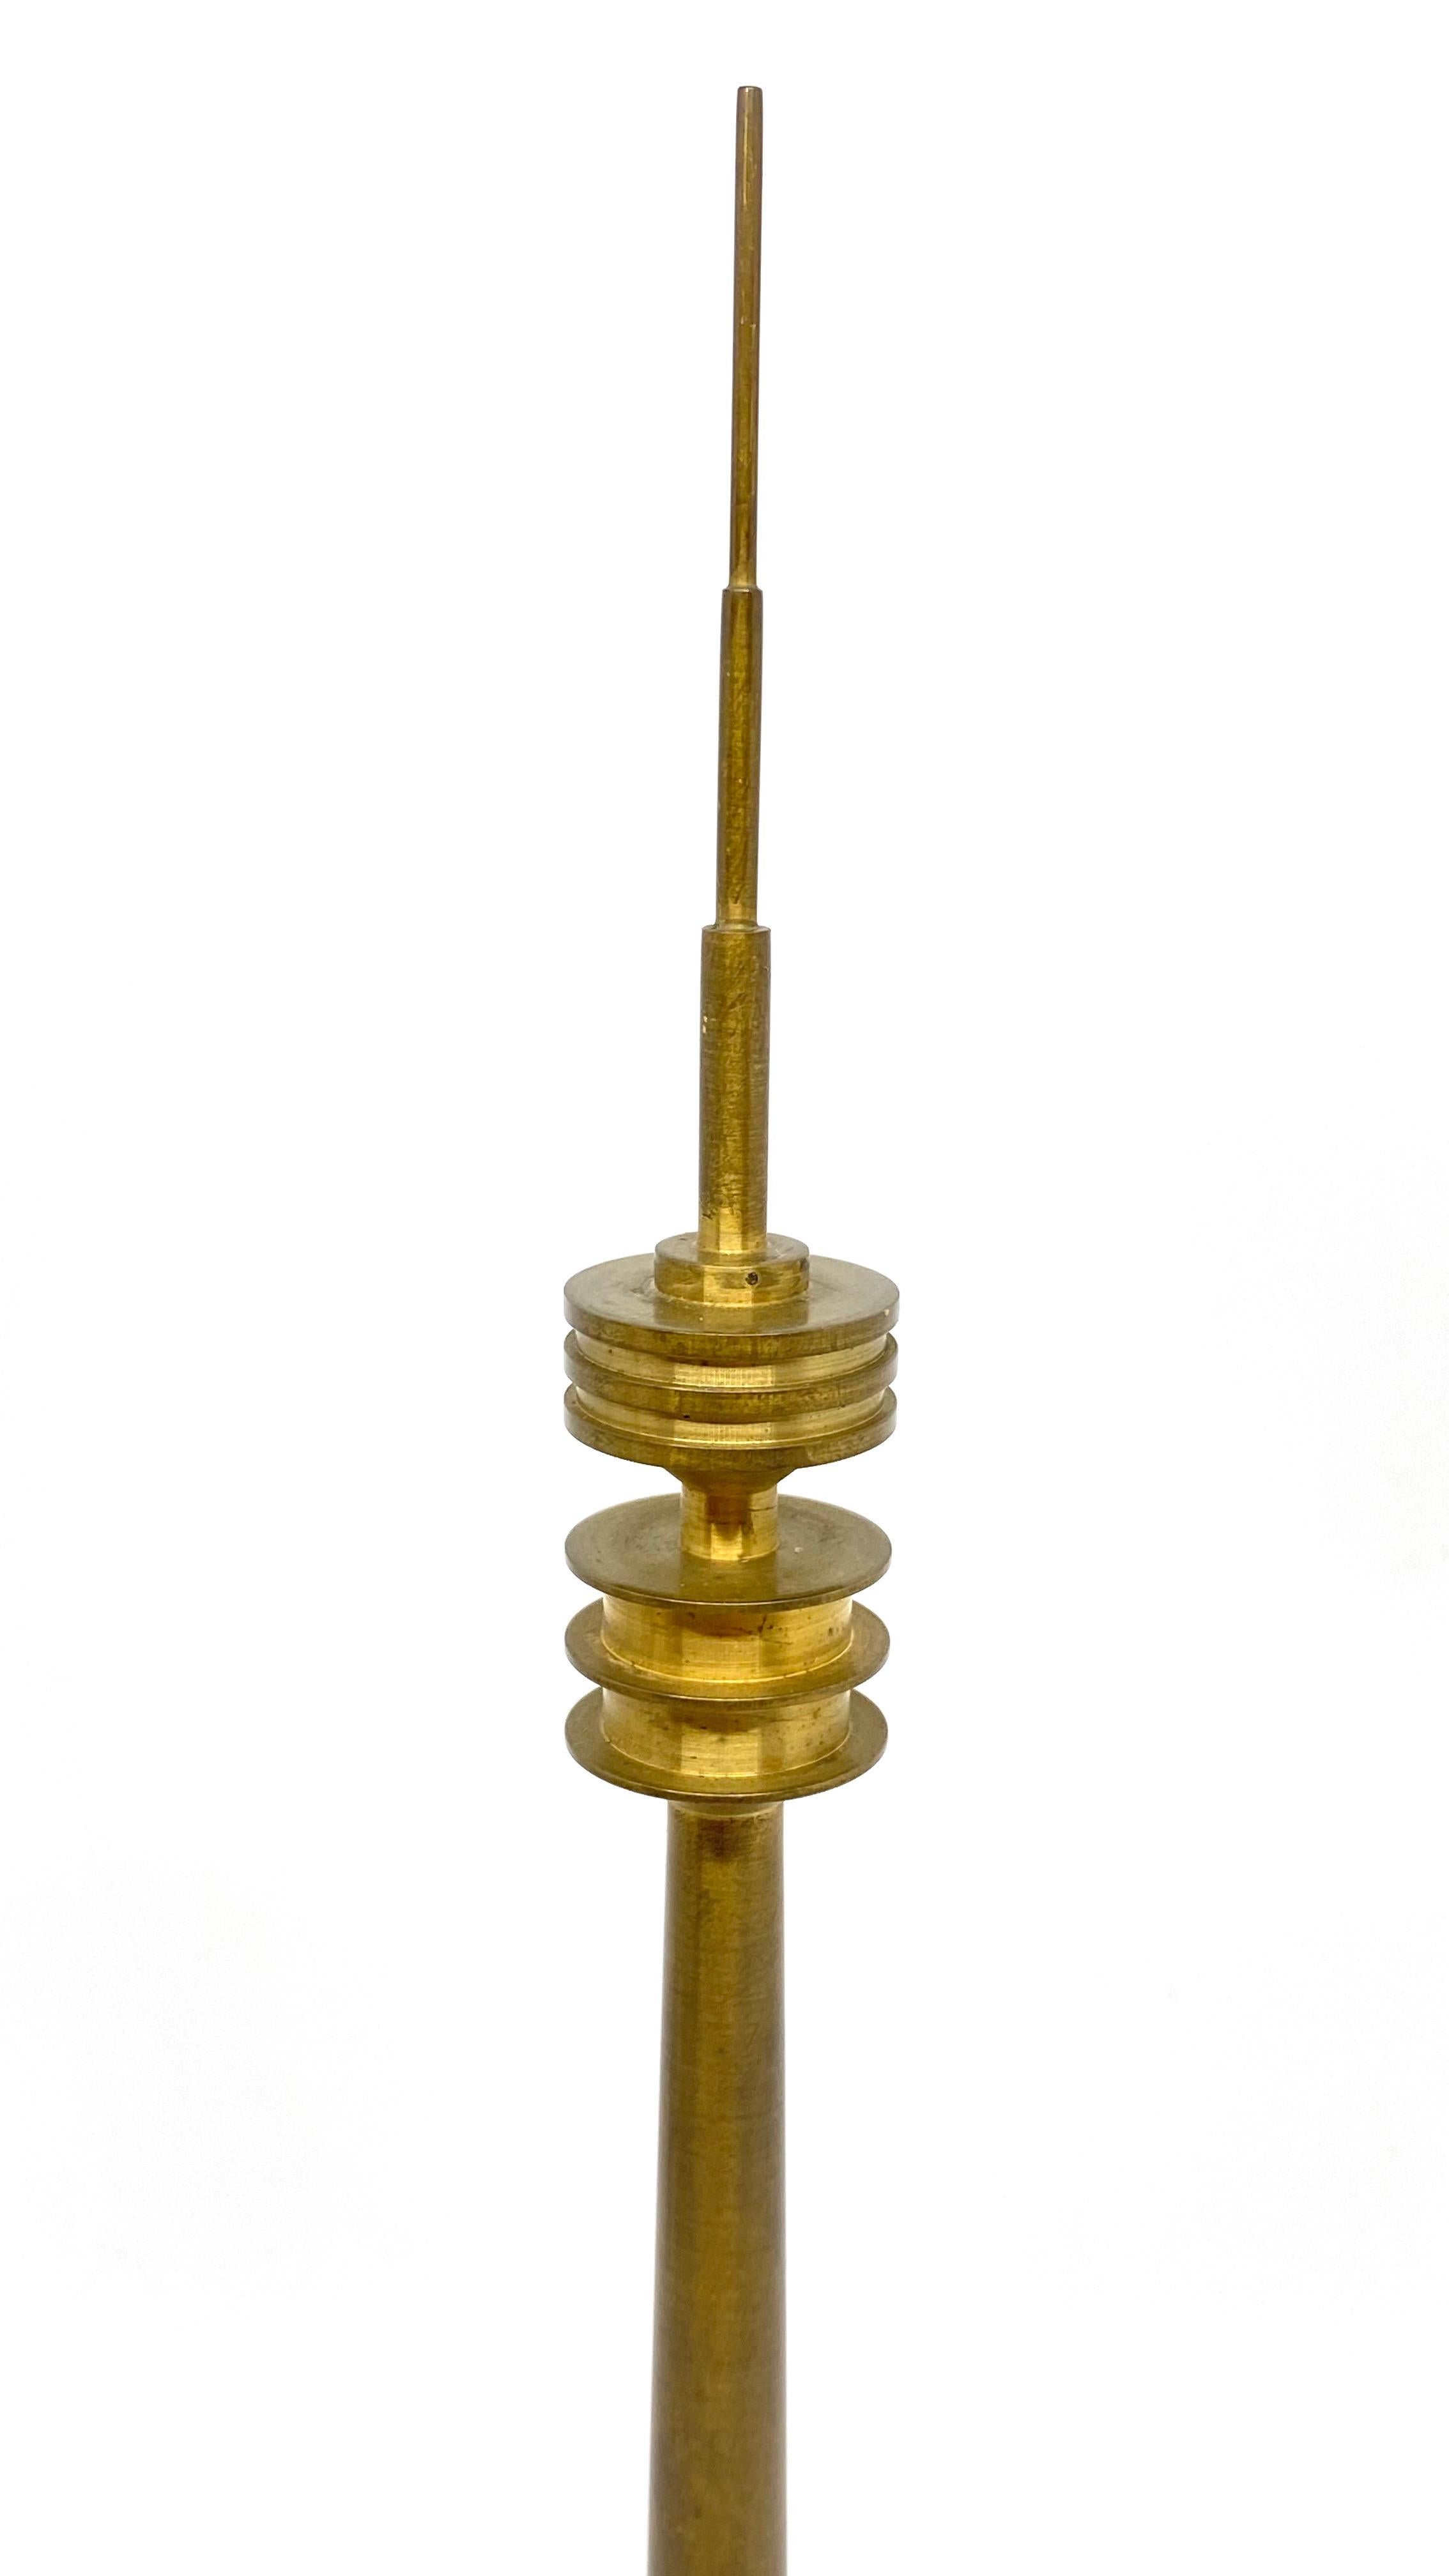 Scaled model of the Munich television tower. Hand-spun in aluminium and brass. A nice architectural sculpture for every living or mans room.